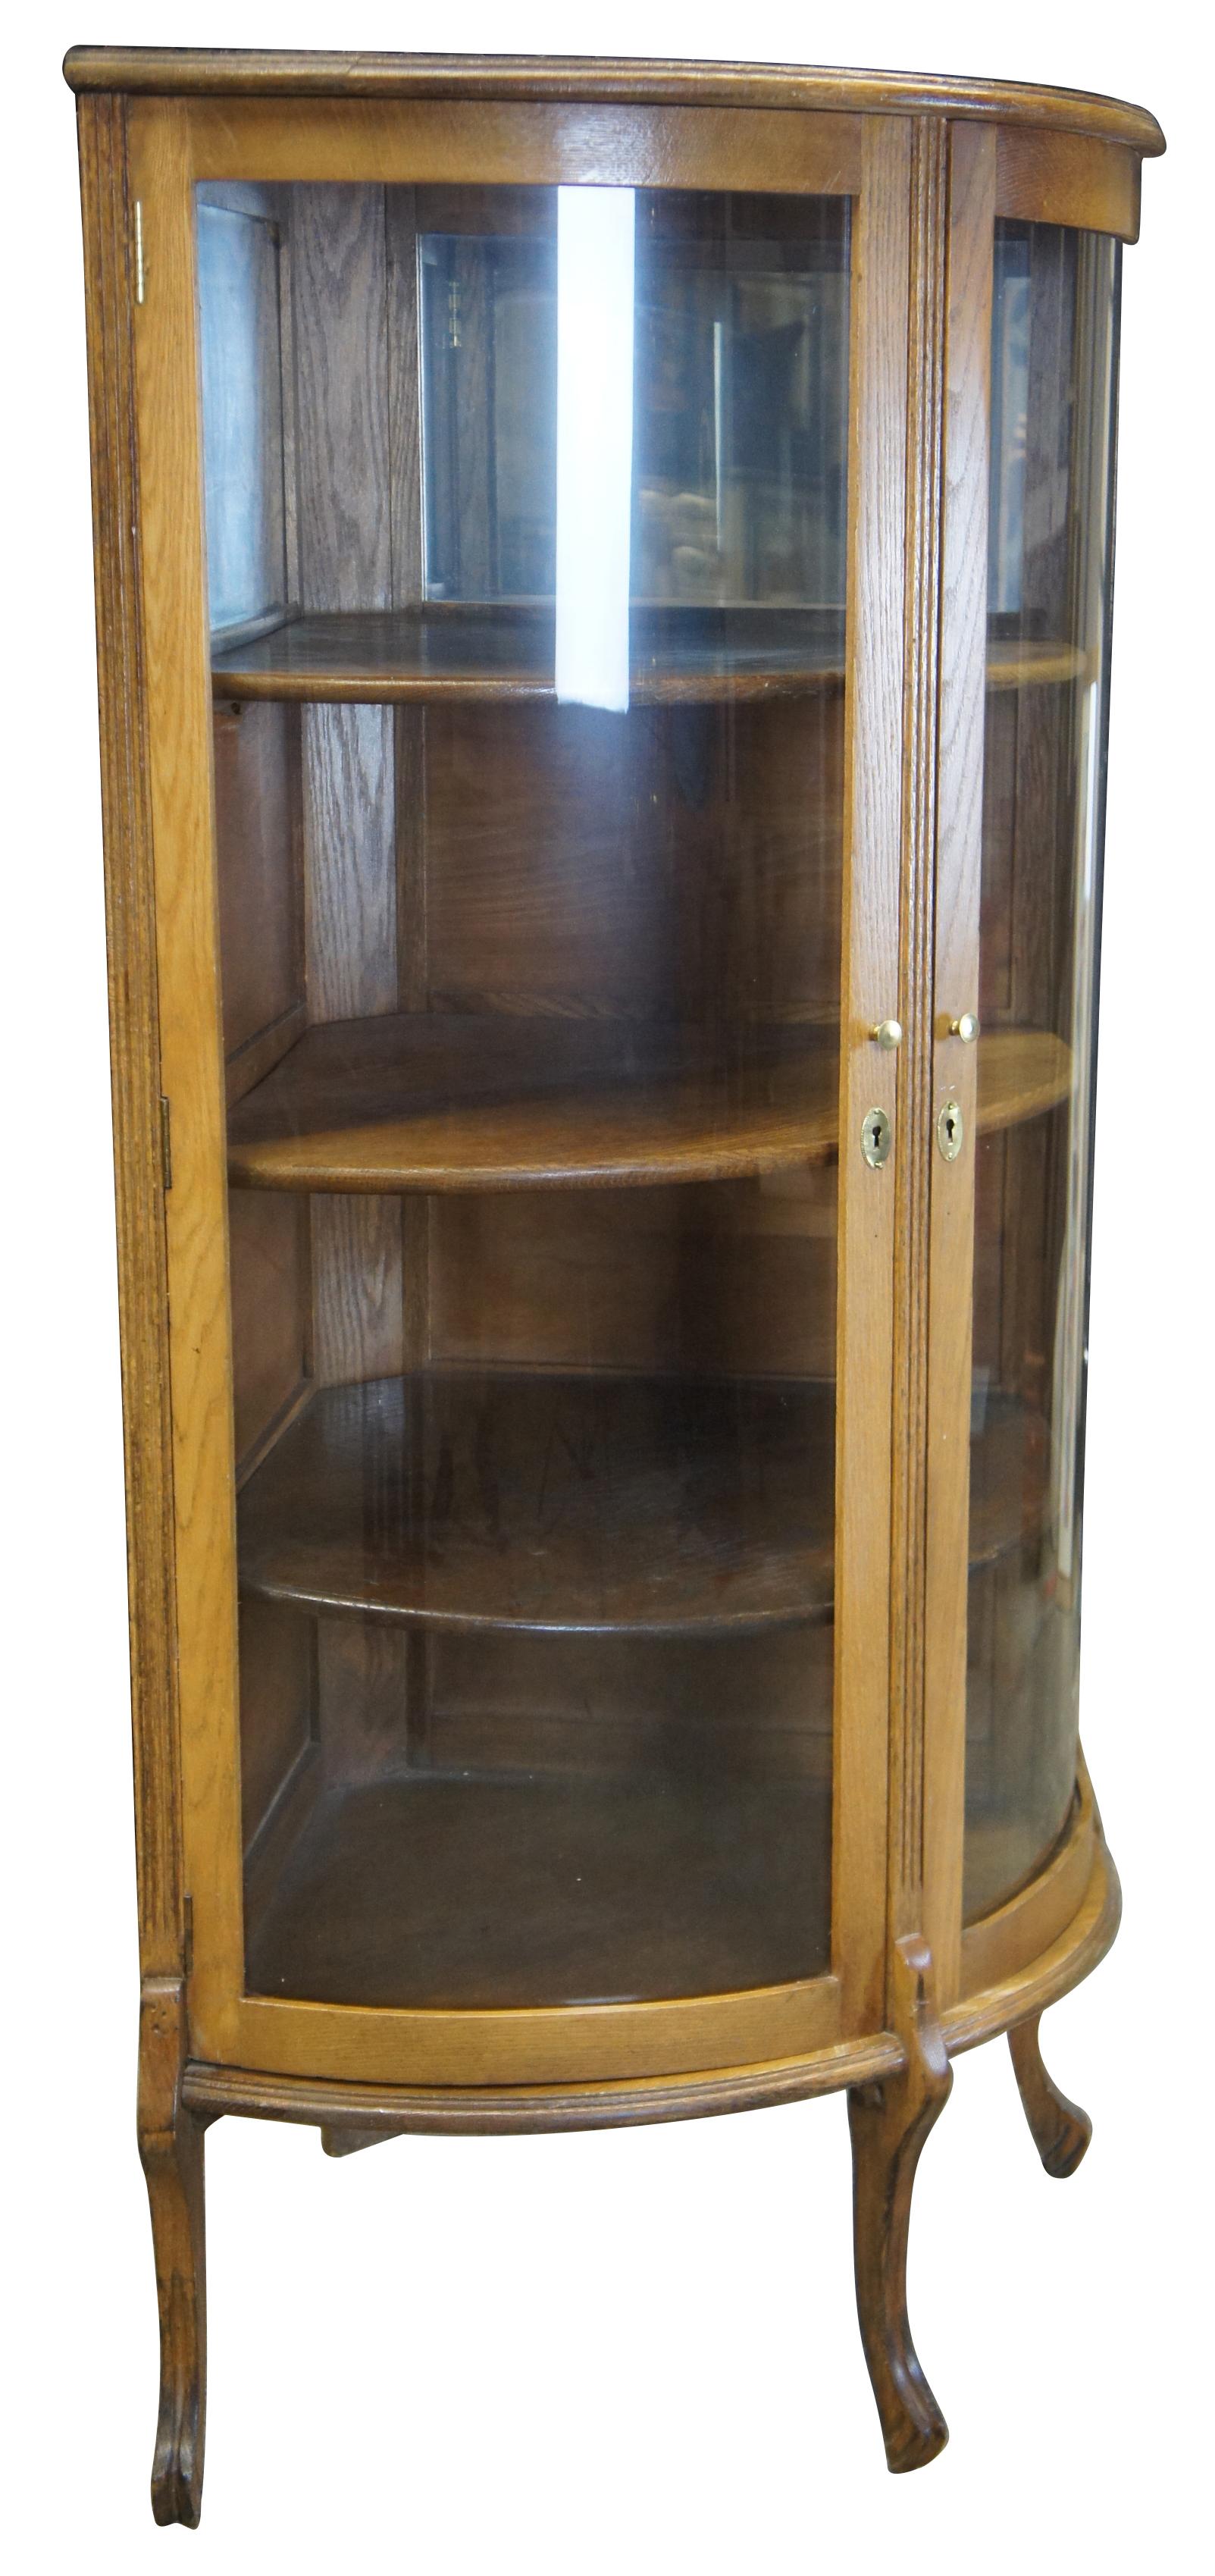 Early 20th century Canadian oak corner curio cabinet. Features three shelves and two mirrors behind doors. Made in Canada.
 